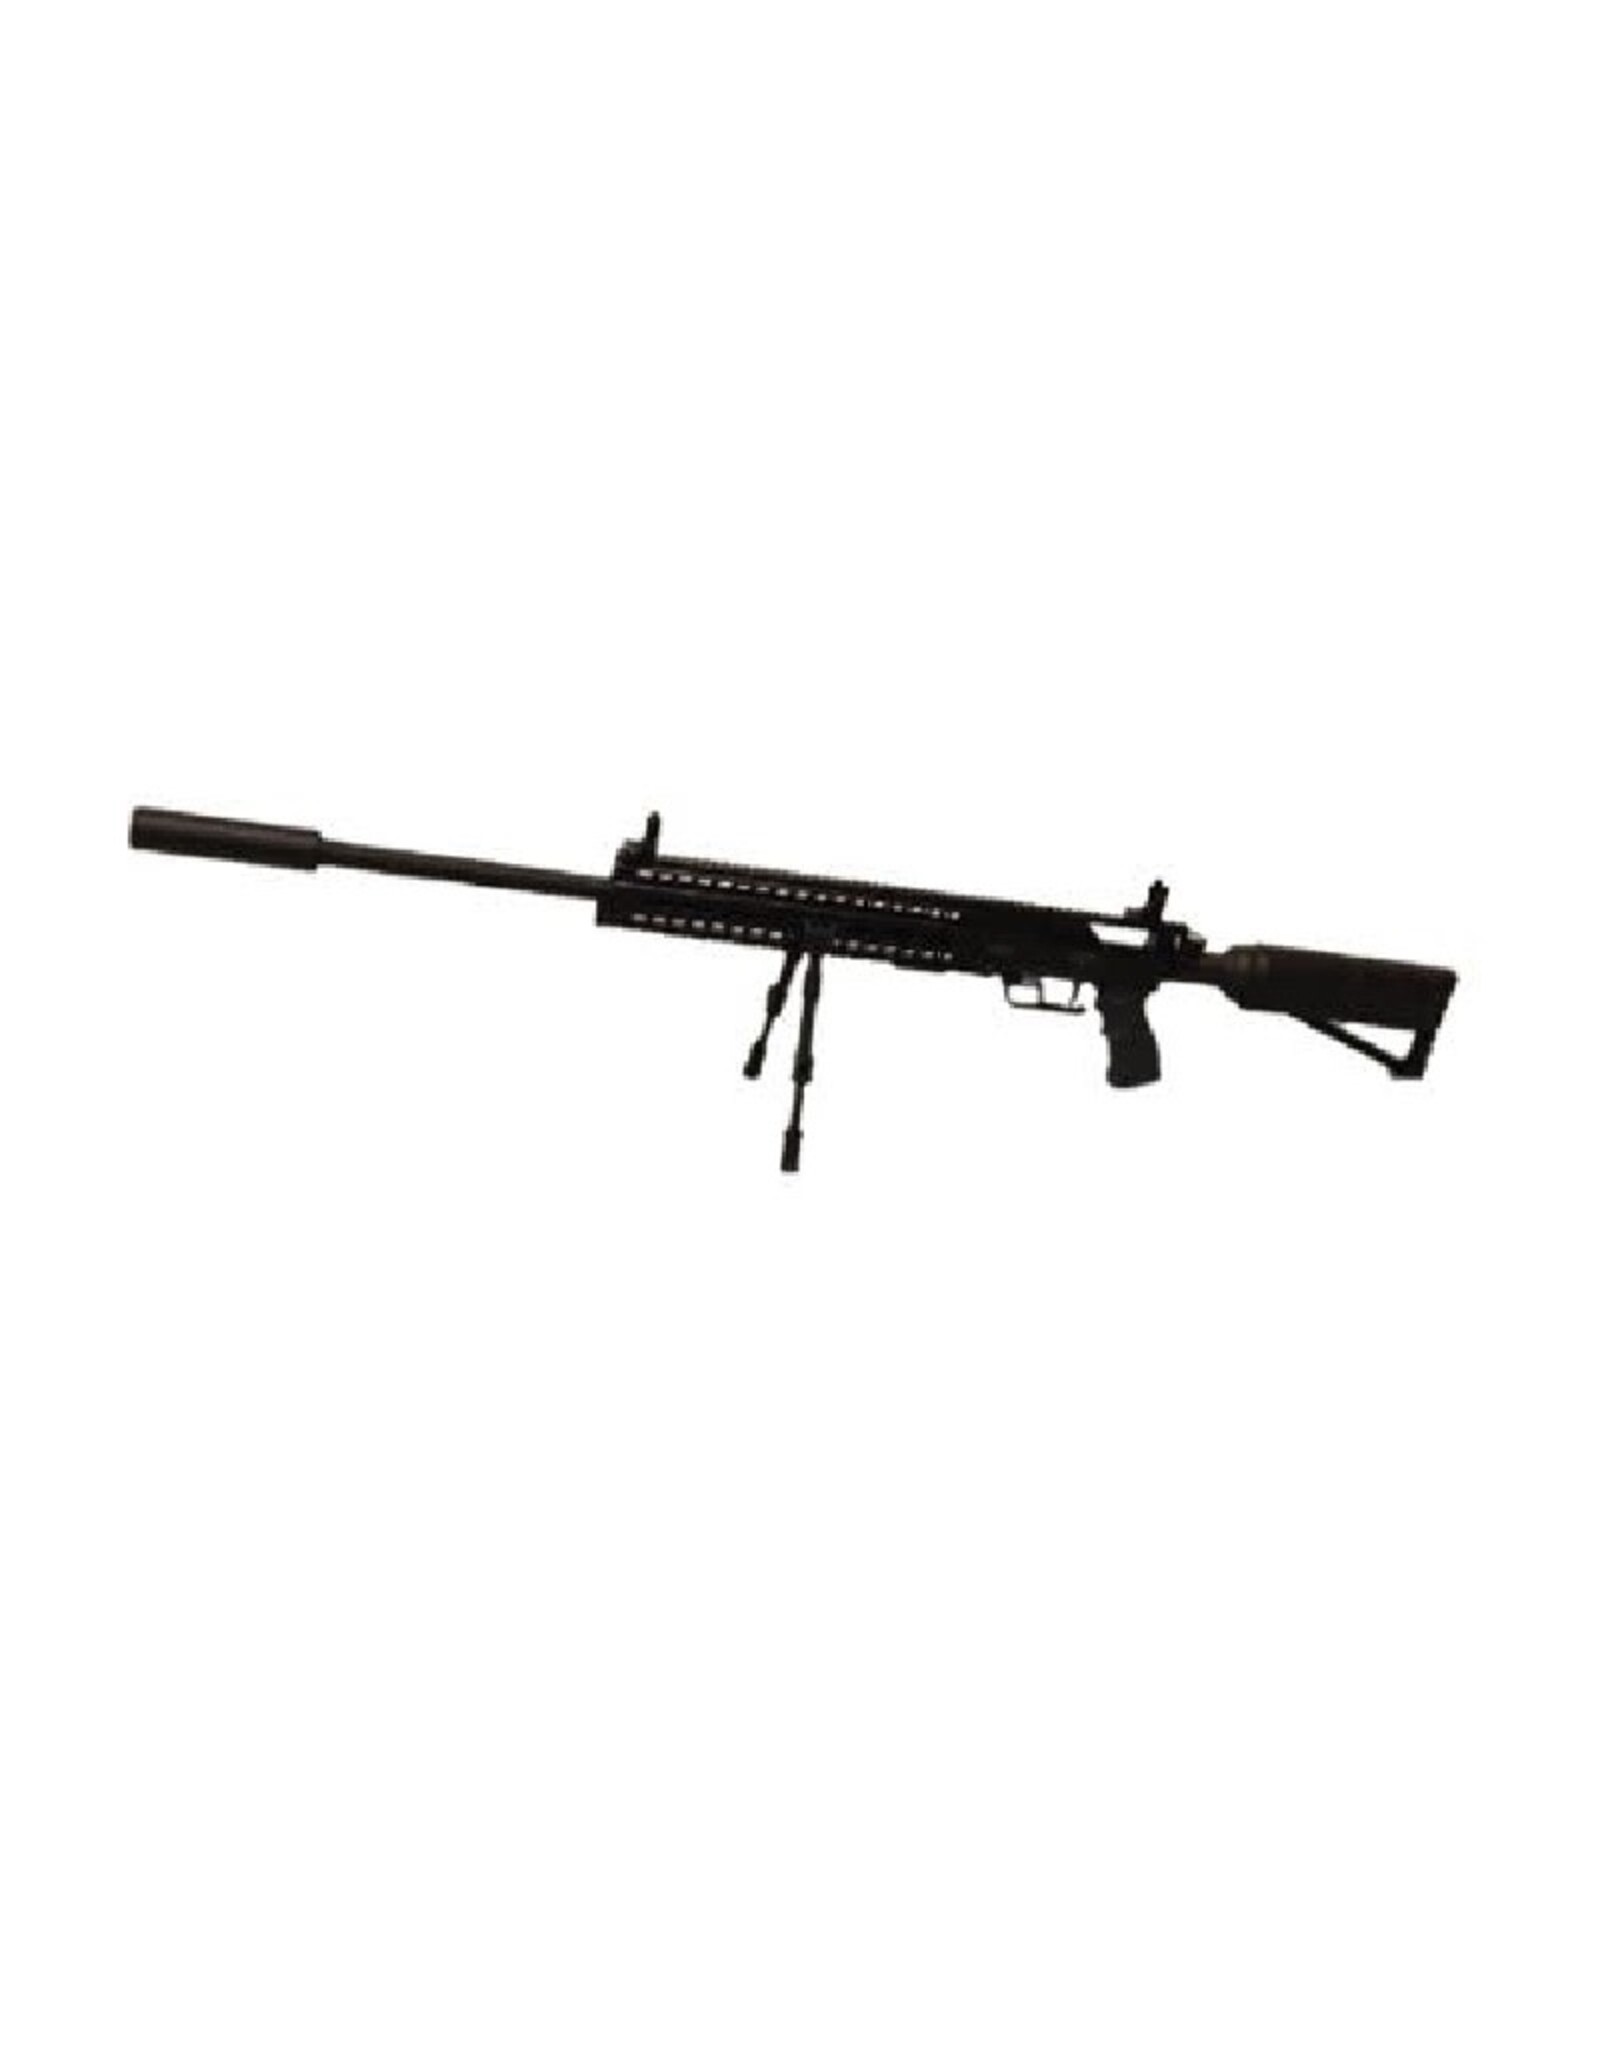 Evanix .30 (7.62mm) Cal. Evanix Rex-Ibex PCP Sniper - Single Shot Air Rifle with Front & Rear Sights and Bipod